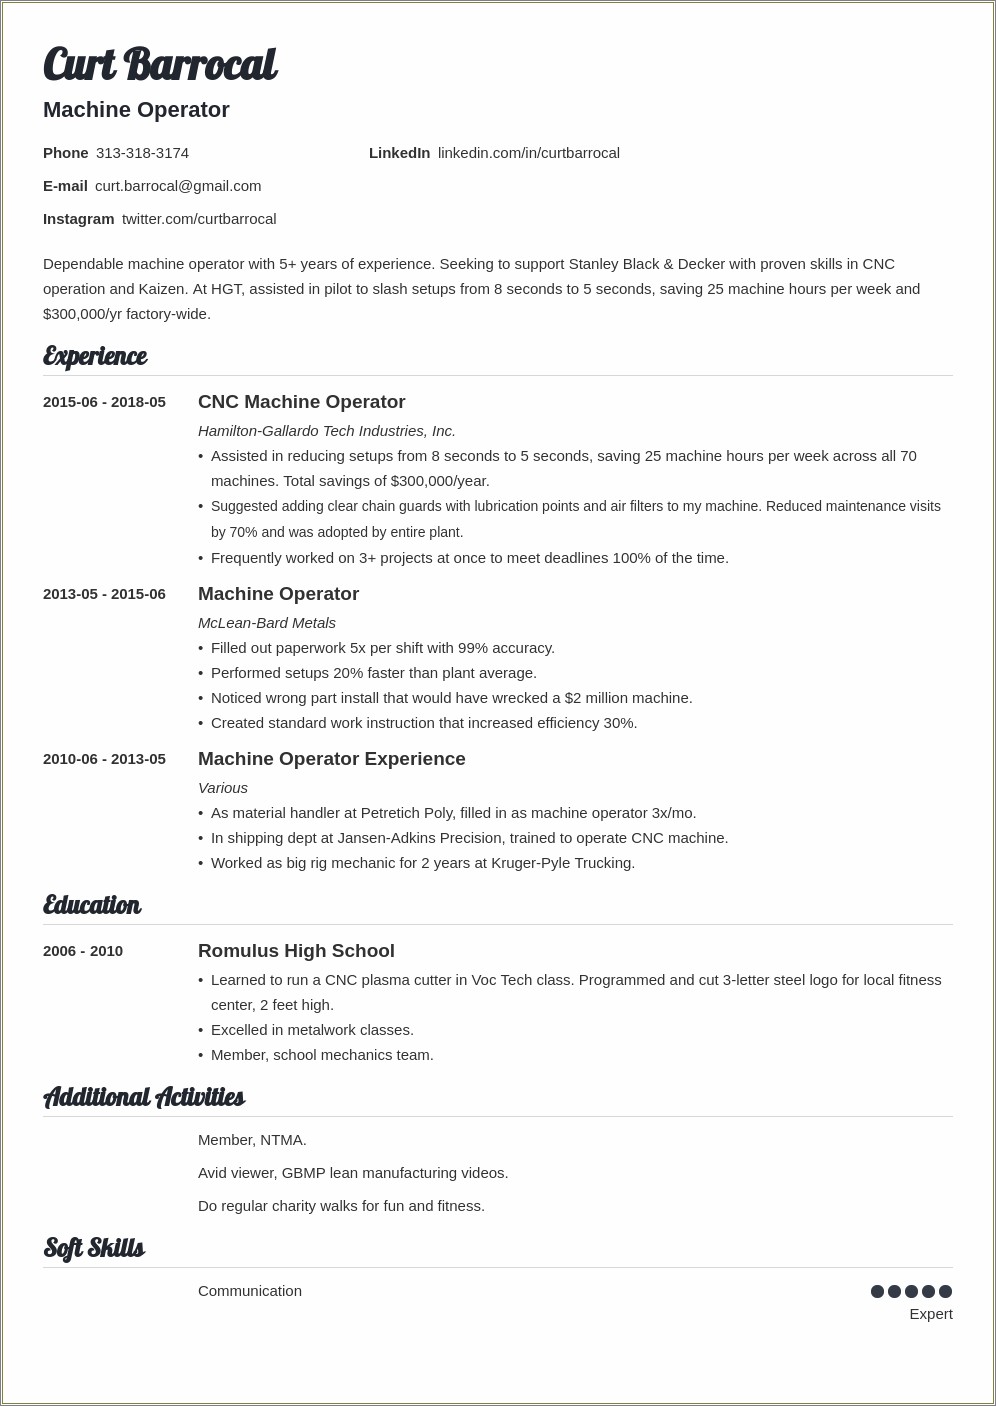 Resume Objective For Entry Level Machine Operator